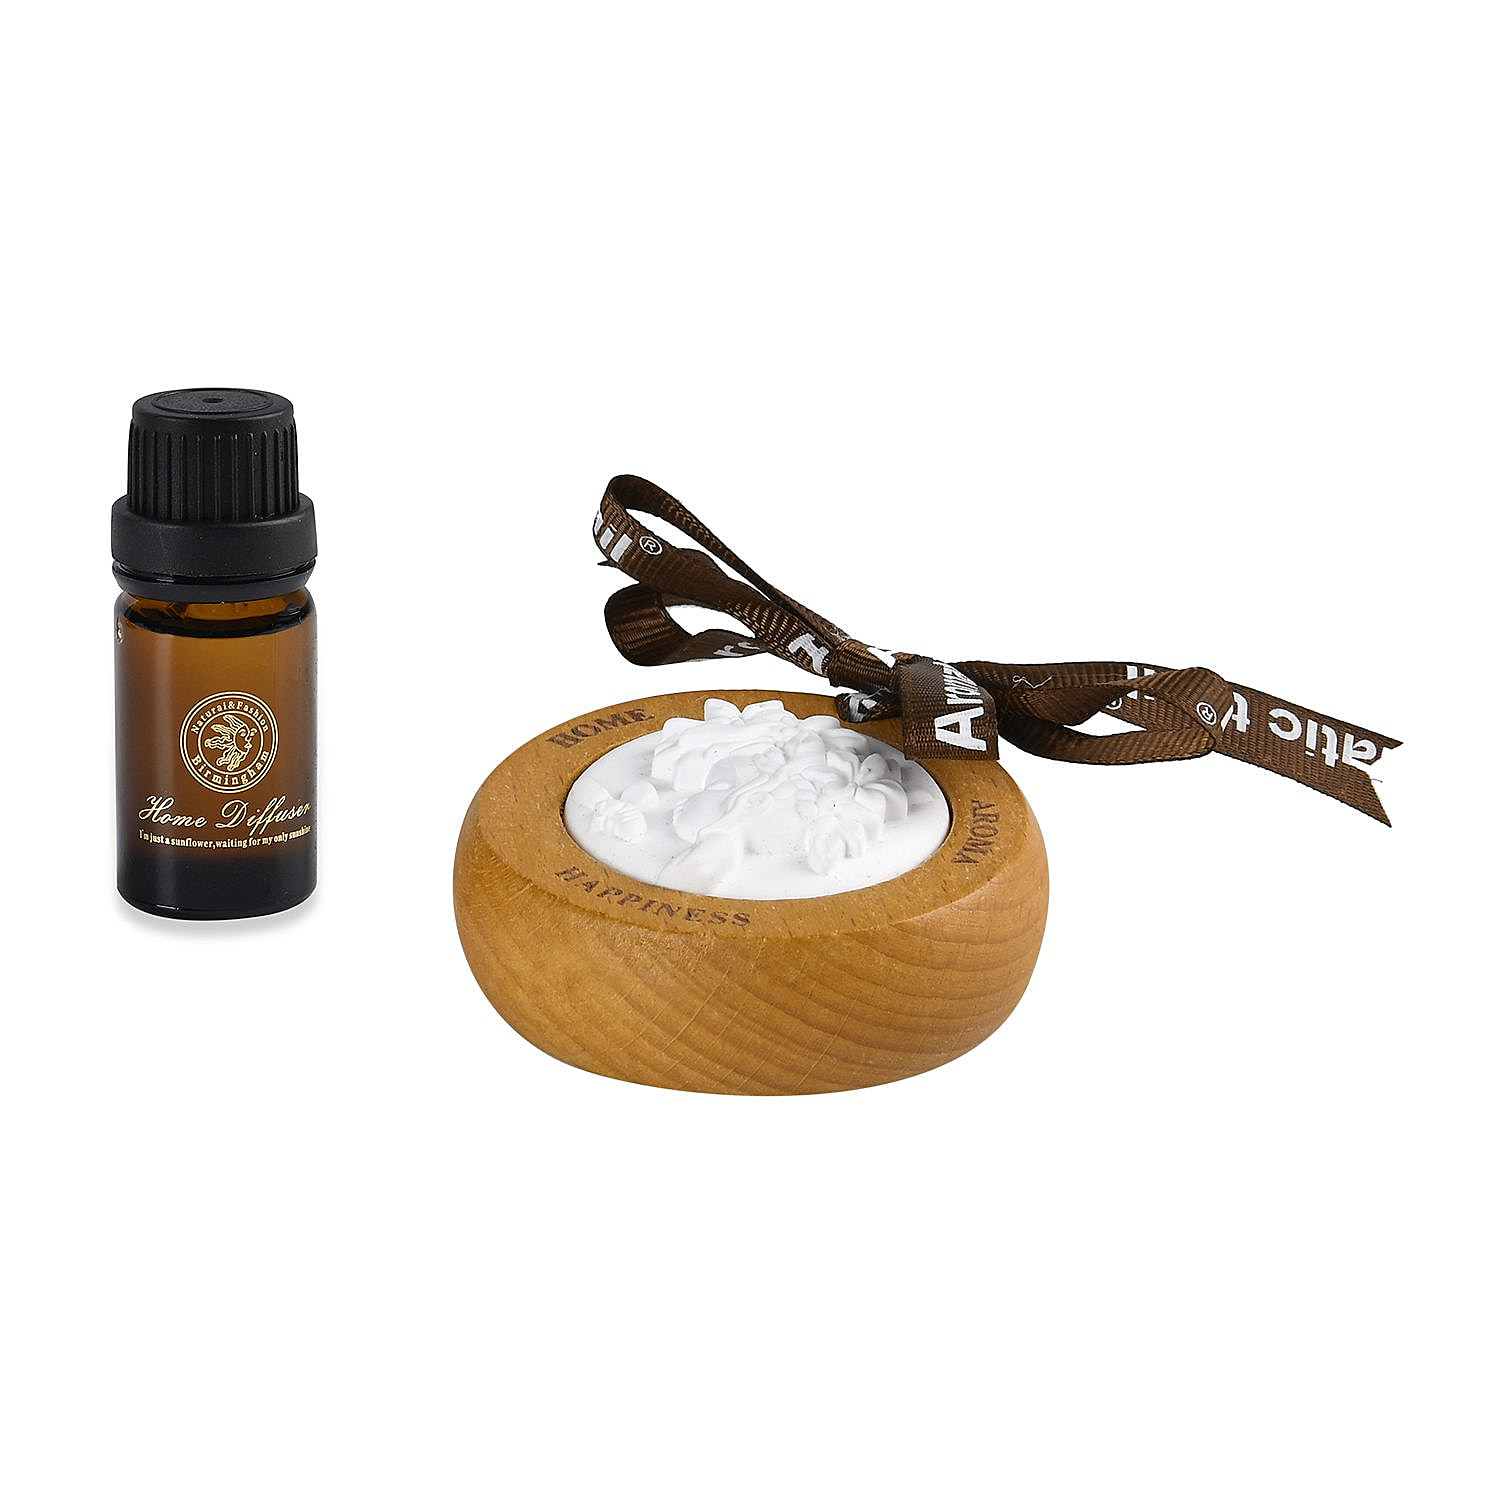 Hanging Ornament with Essential Oil - Jasmine